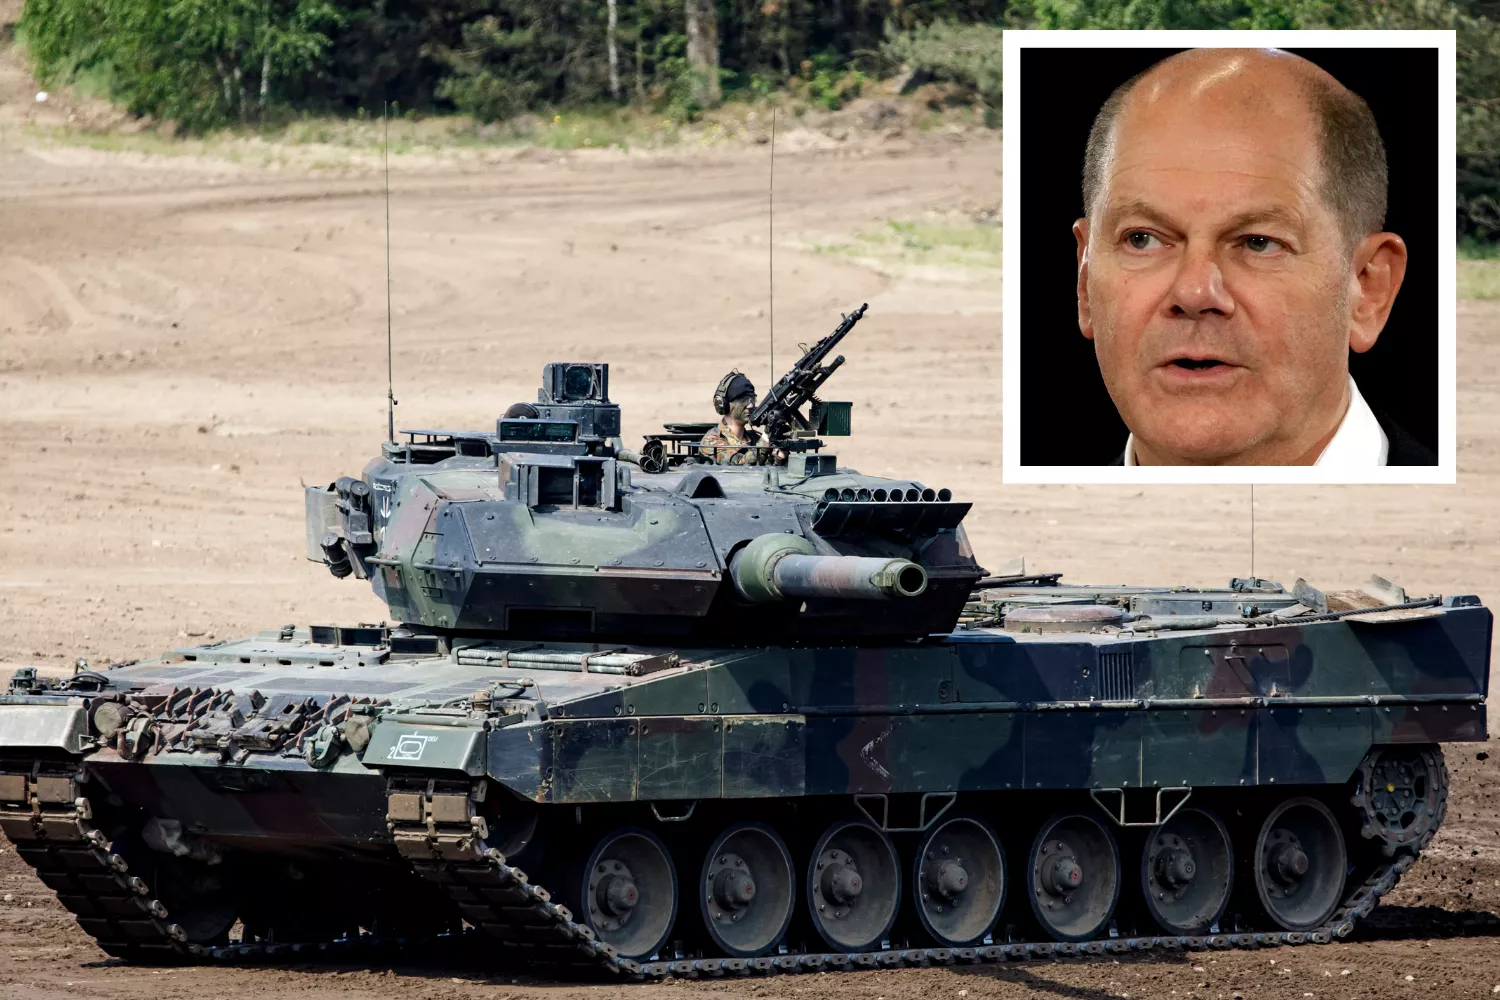 Why Leopard 2 Tanks Would Make 'Crucial' Difference: Retired Lt. General